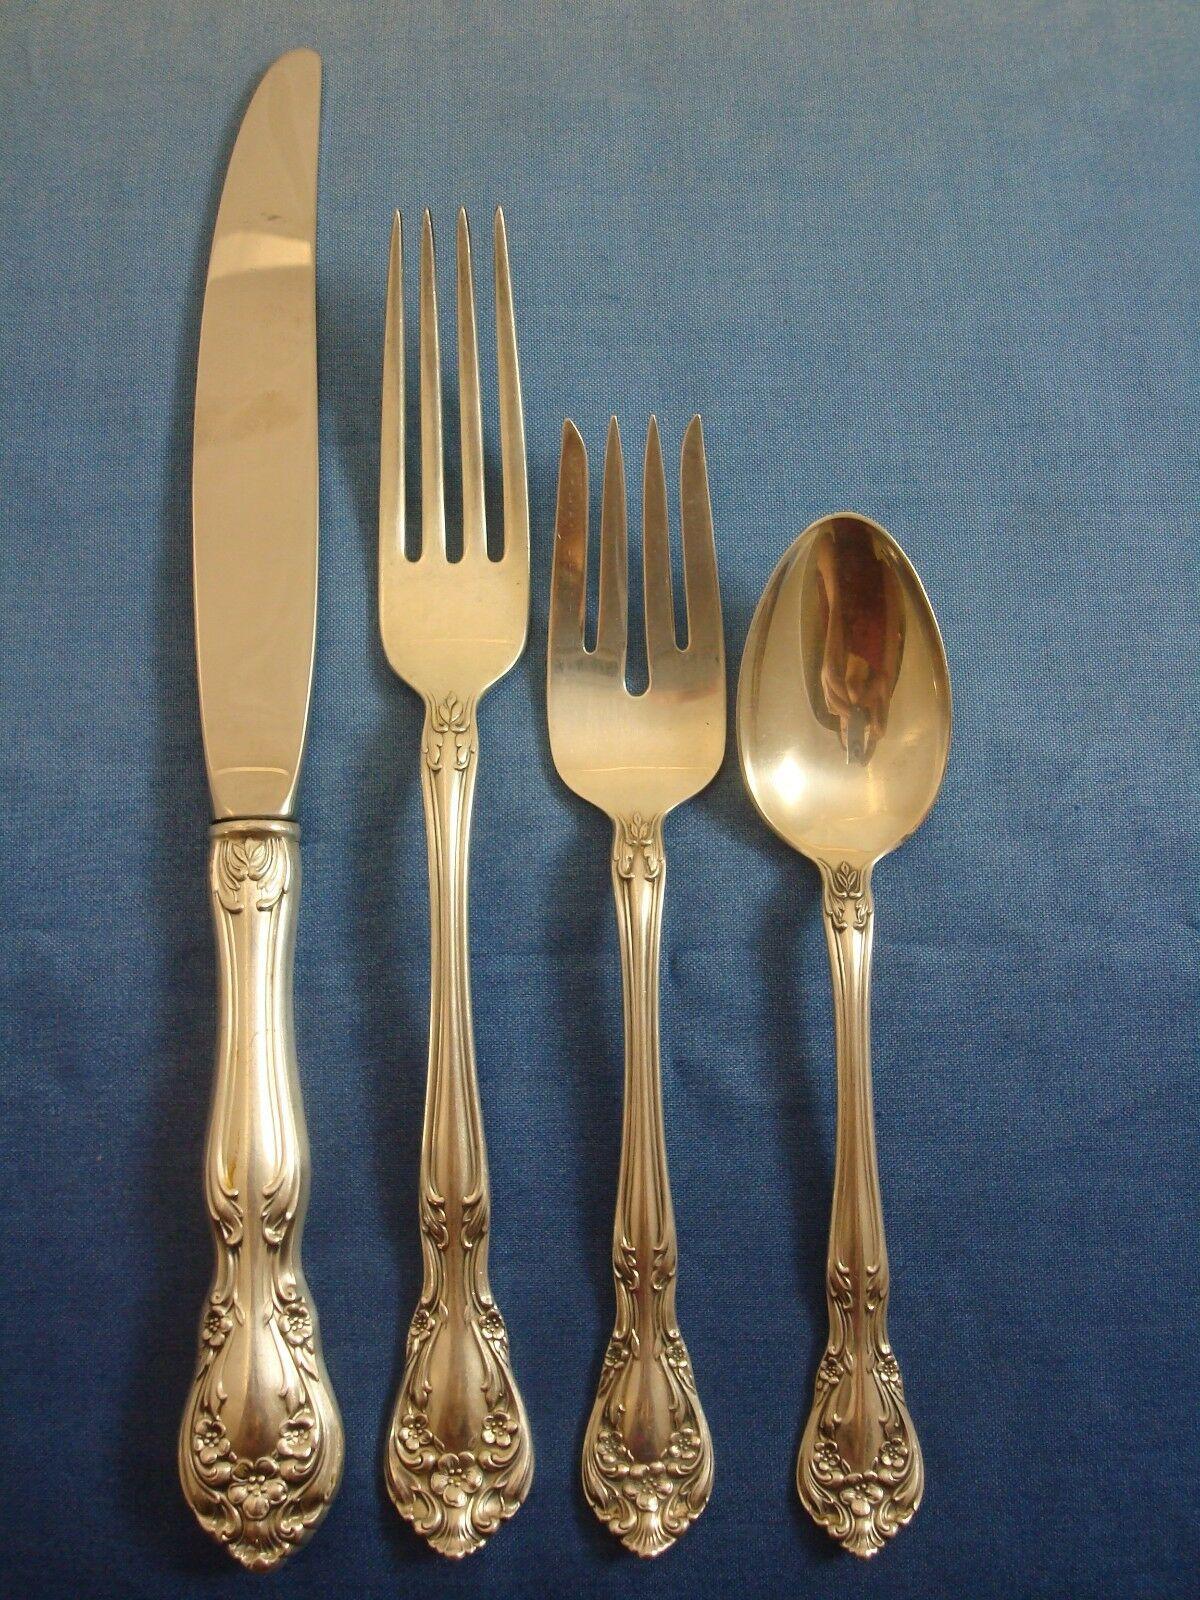 Chateau Rose by Alvin Sterling Silver Flatware Set Service Dinner Size 52 Pieces In Excellent Condition For Sale In Big Bend, WI